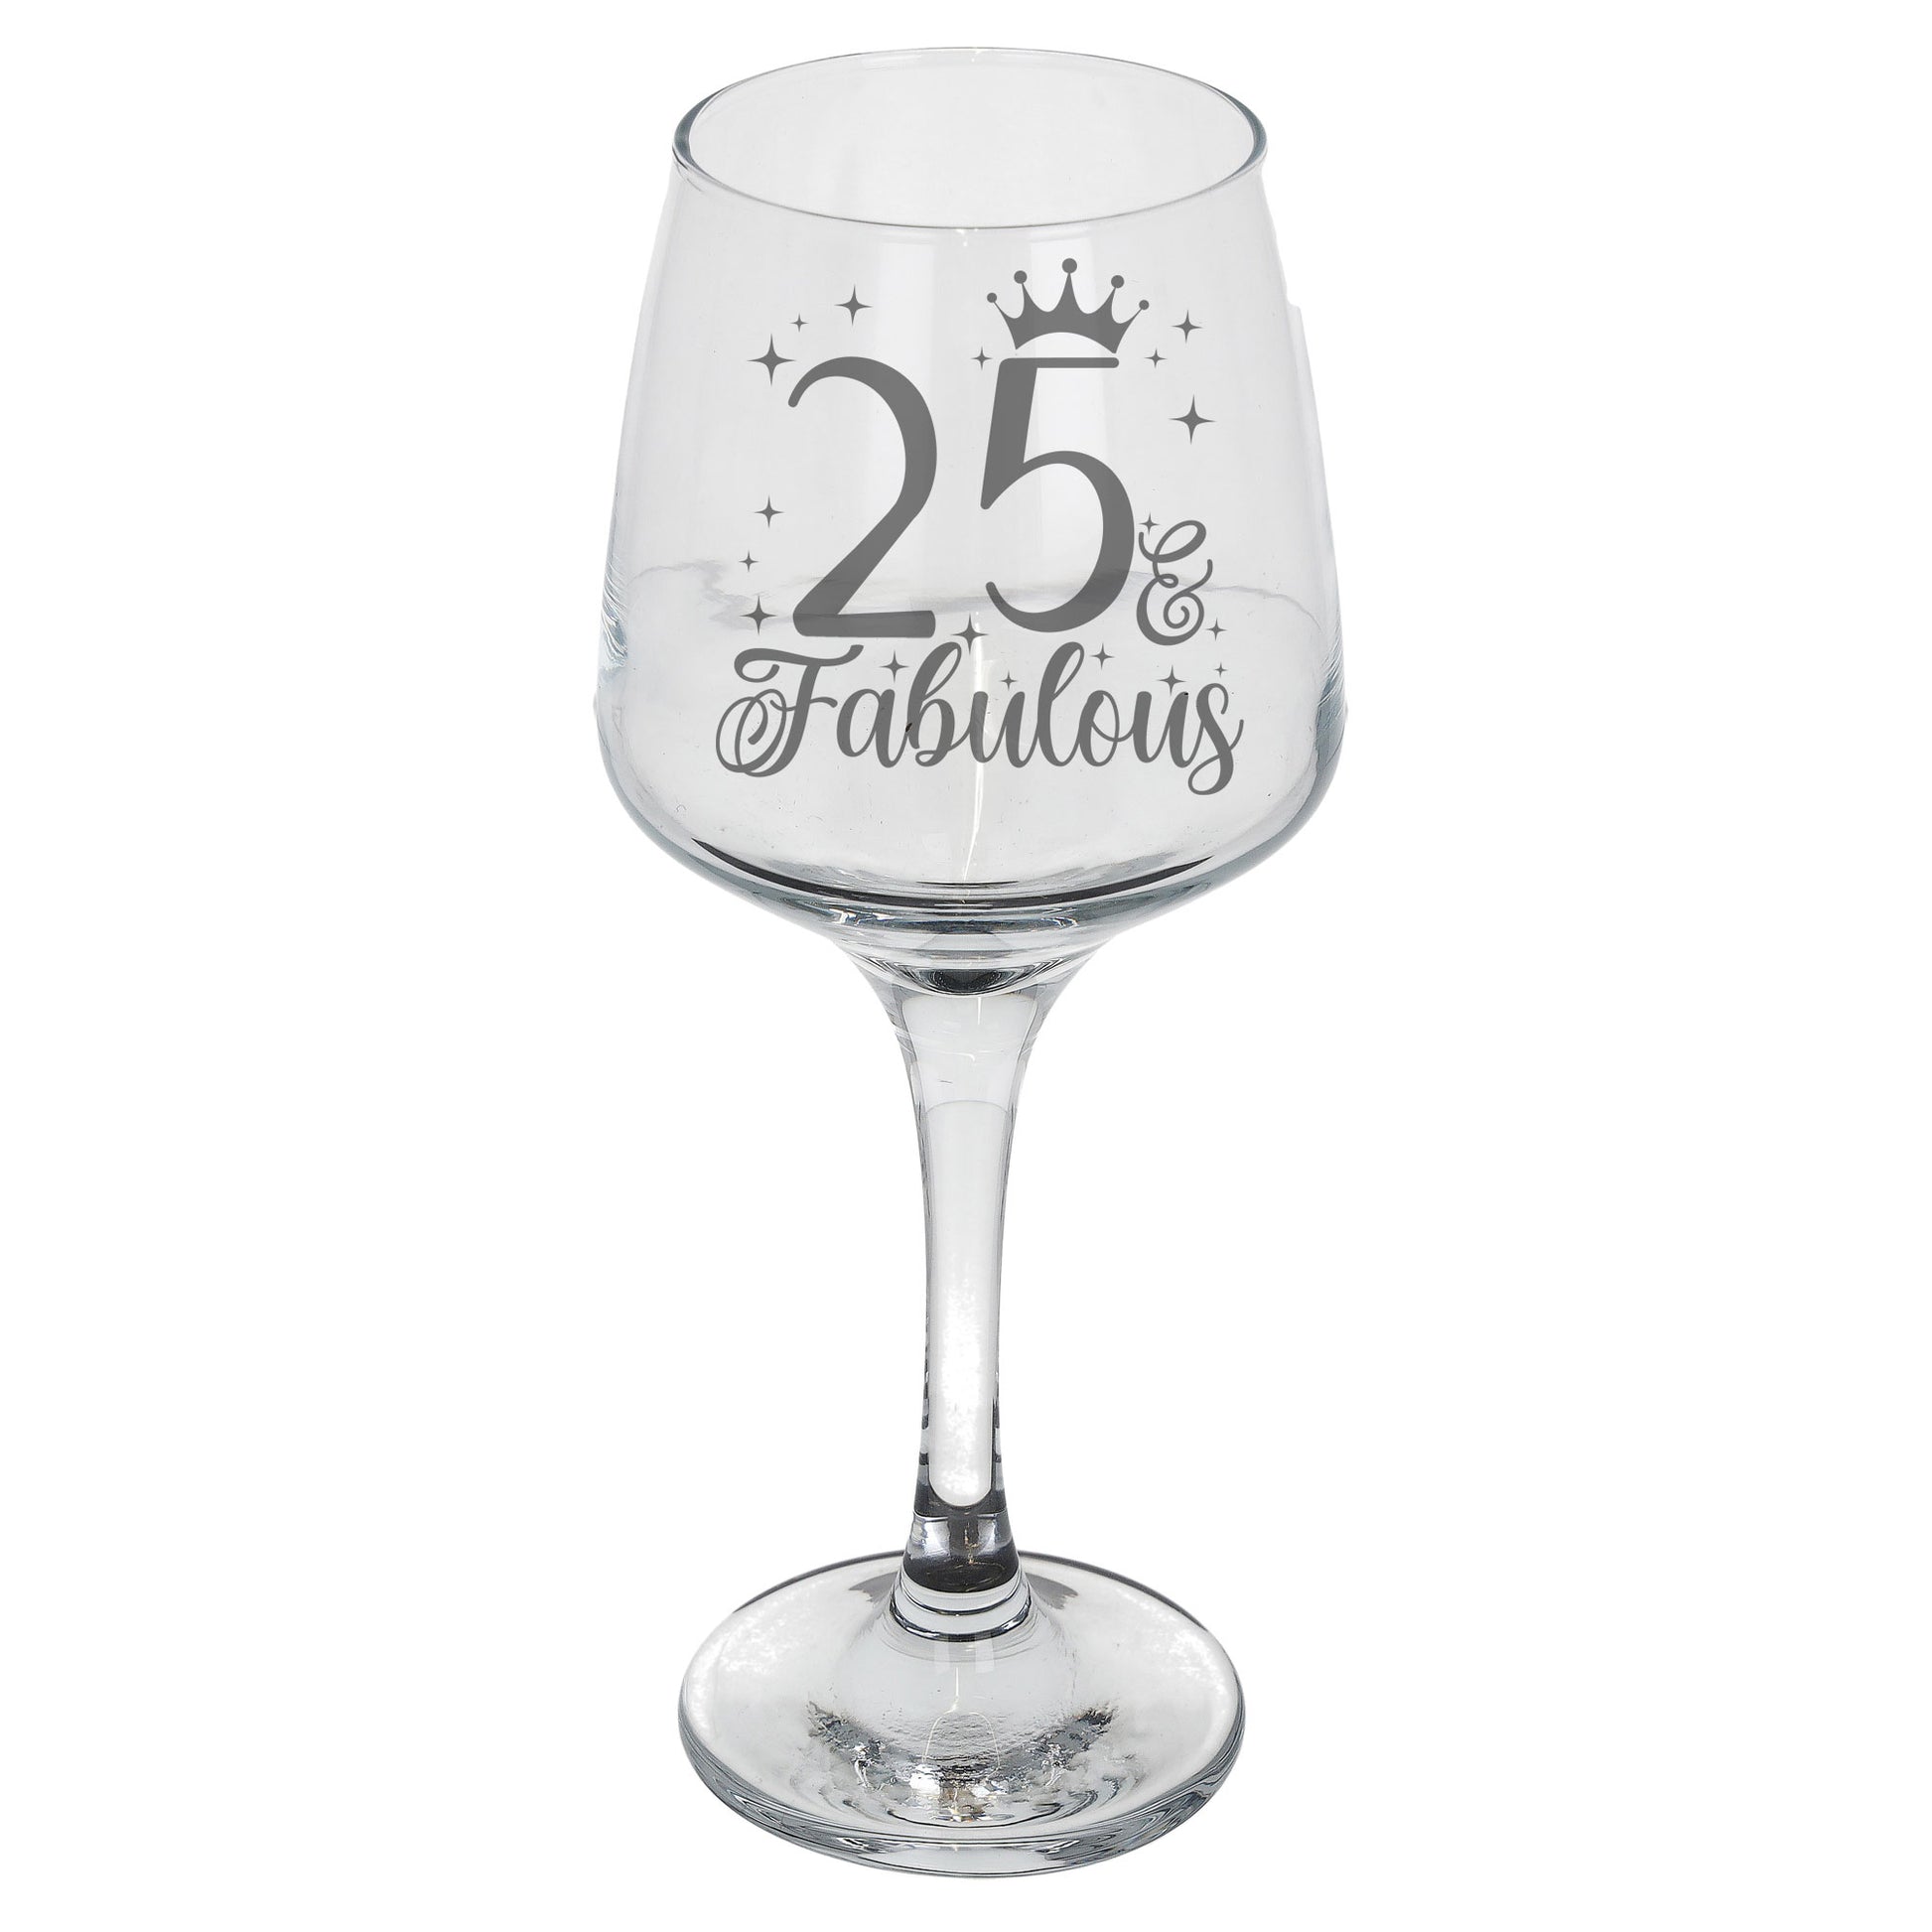 25 & Fabulous 25th Birthday Gift Engraved Wine Glass and/or Coaster Set  - Always Looking Good -   